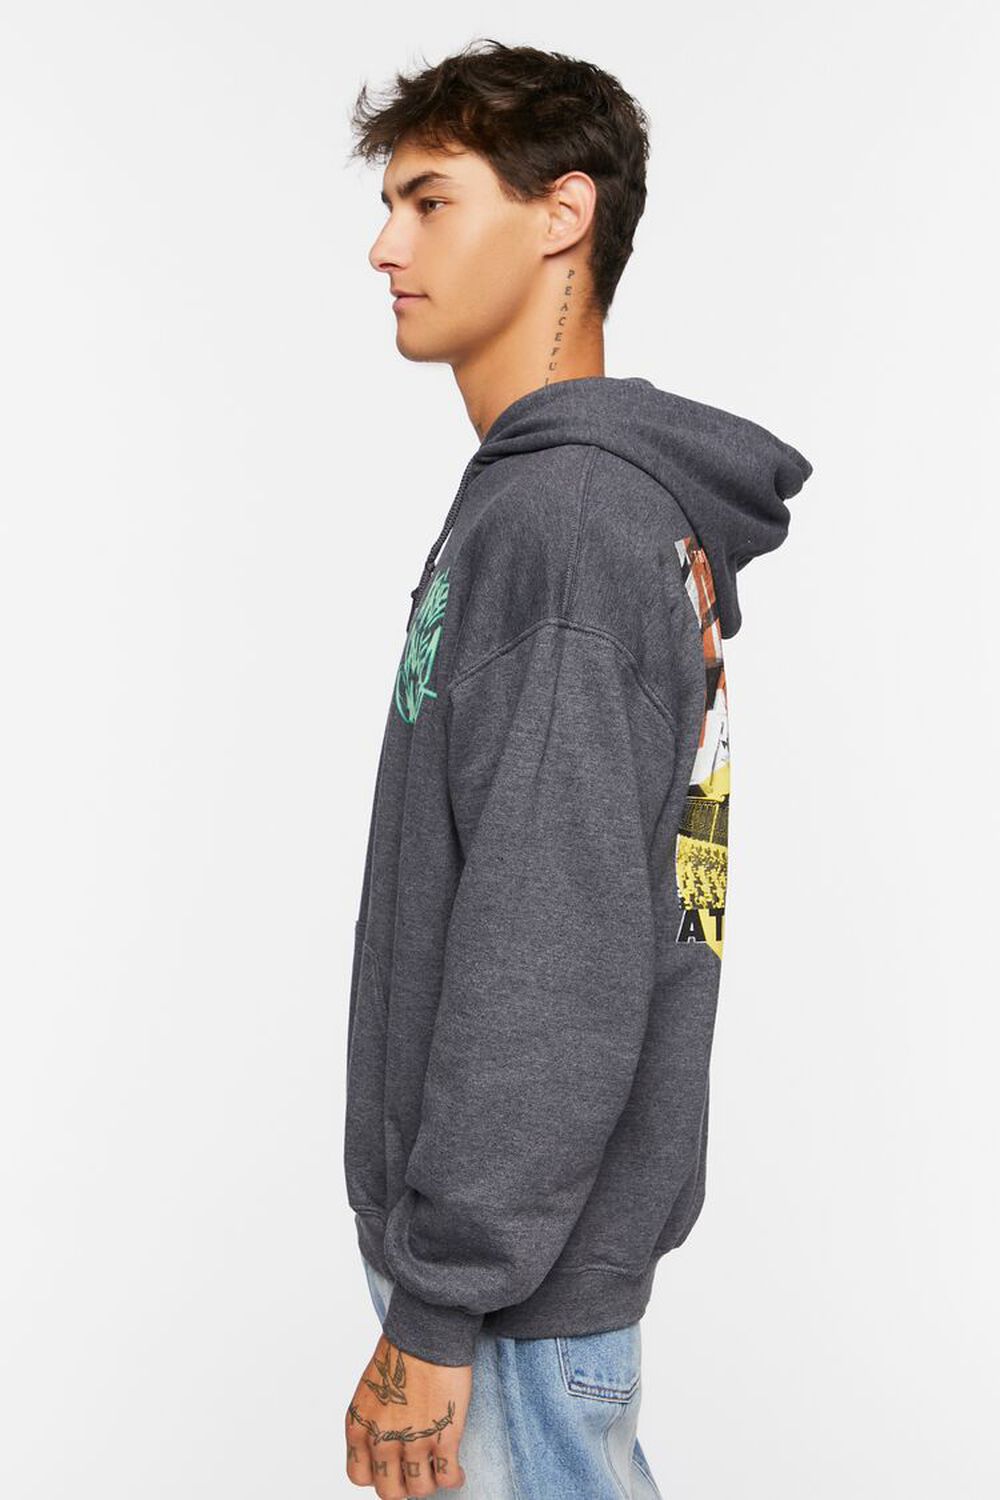 HEATHER GREY/MULTI A Tribe Called Quest Graphic Hoodie, image 2